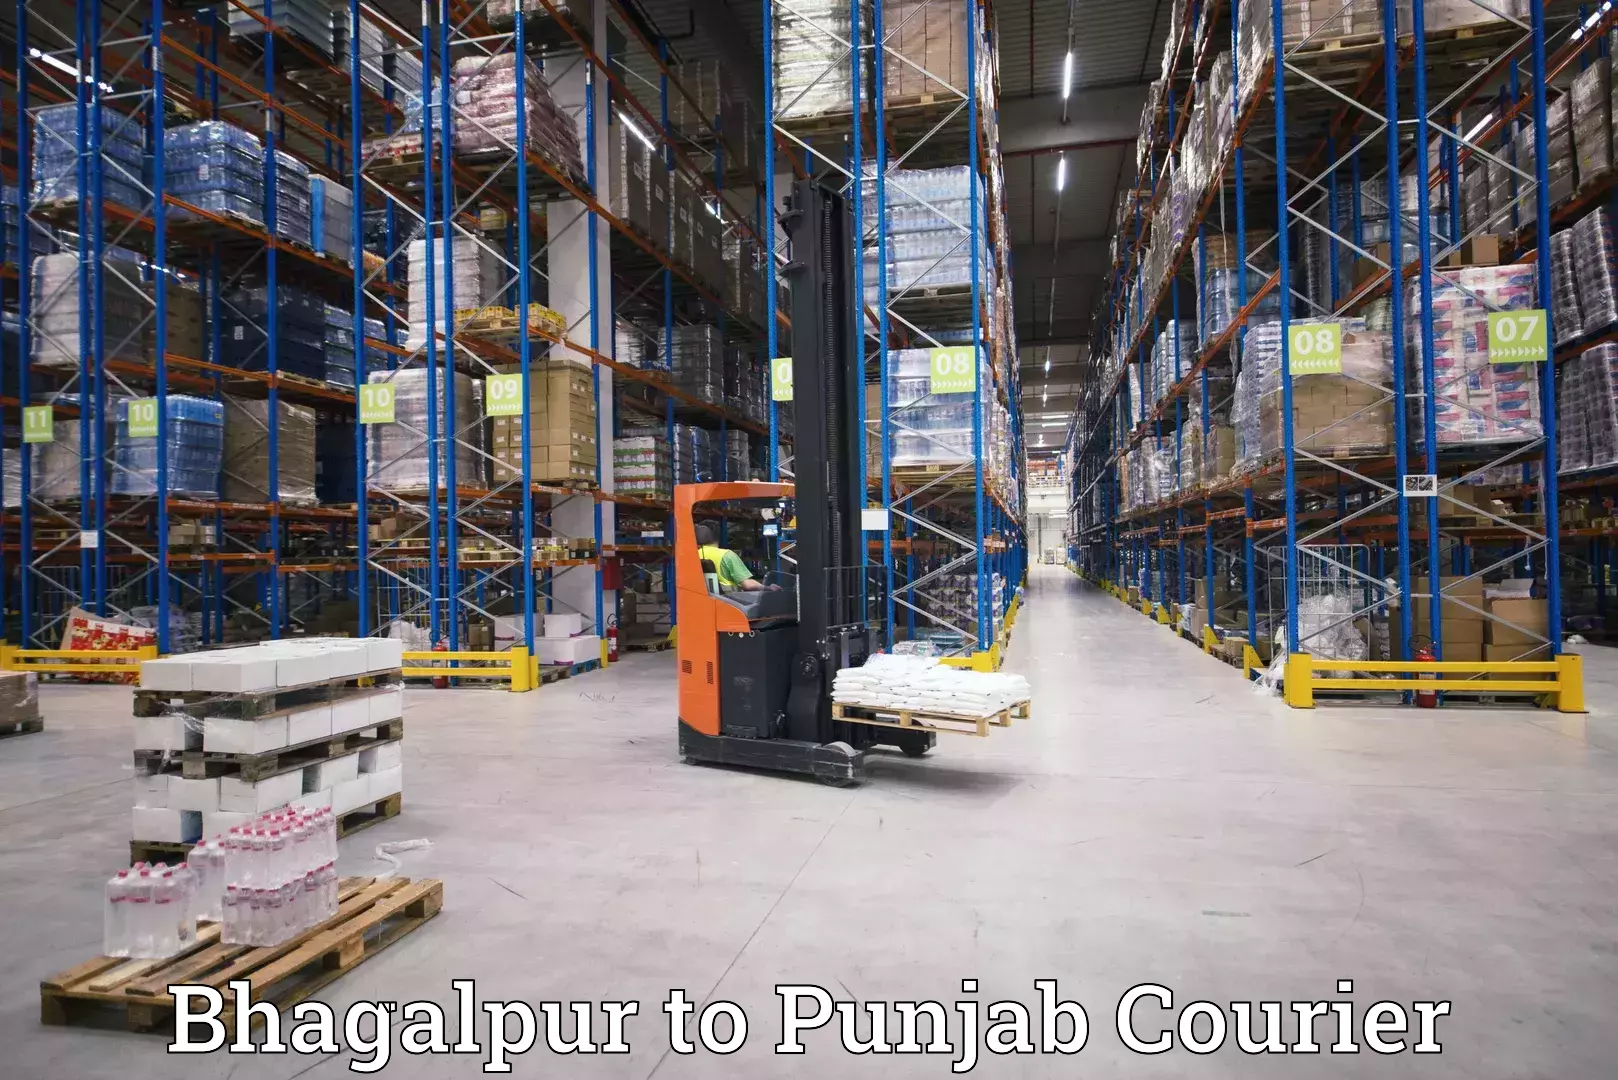 Sustainable courier practices Bhagalpur to Punjab